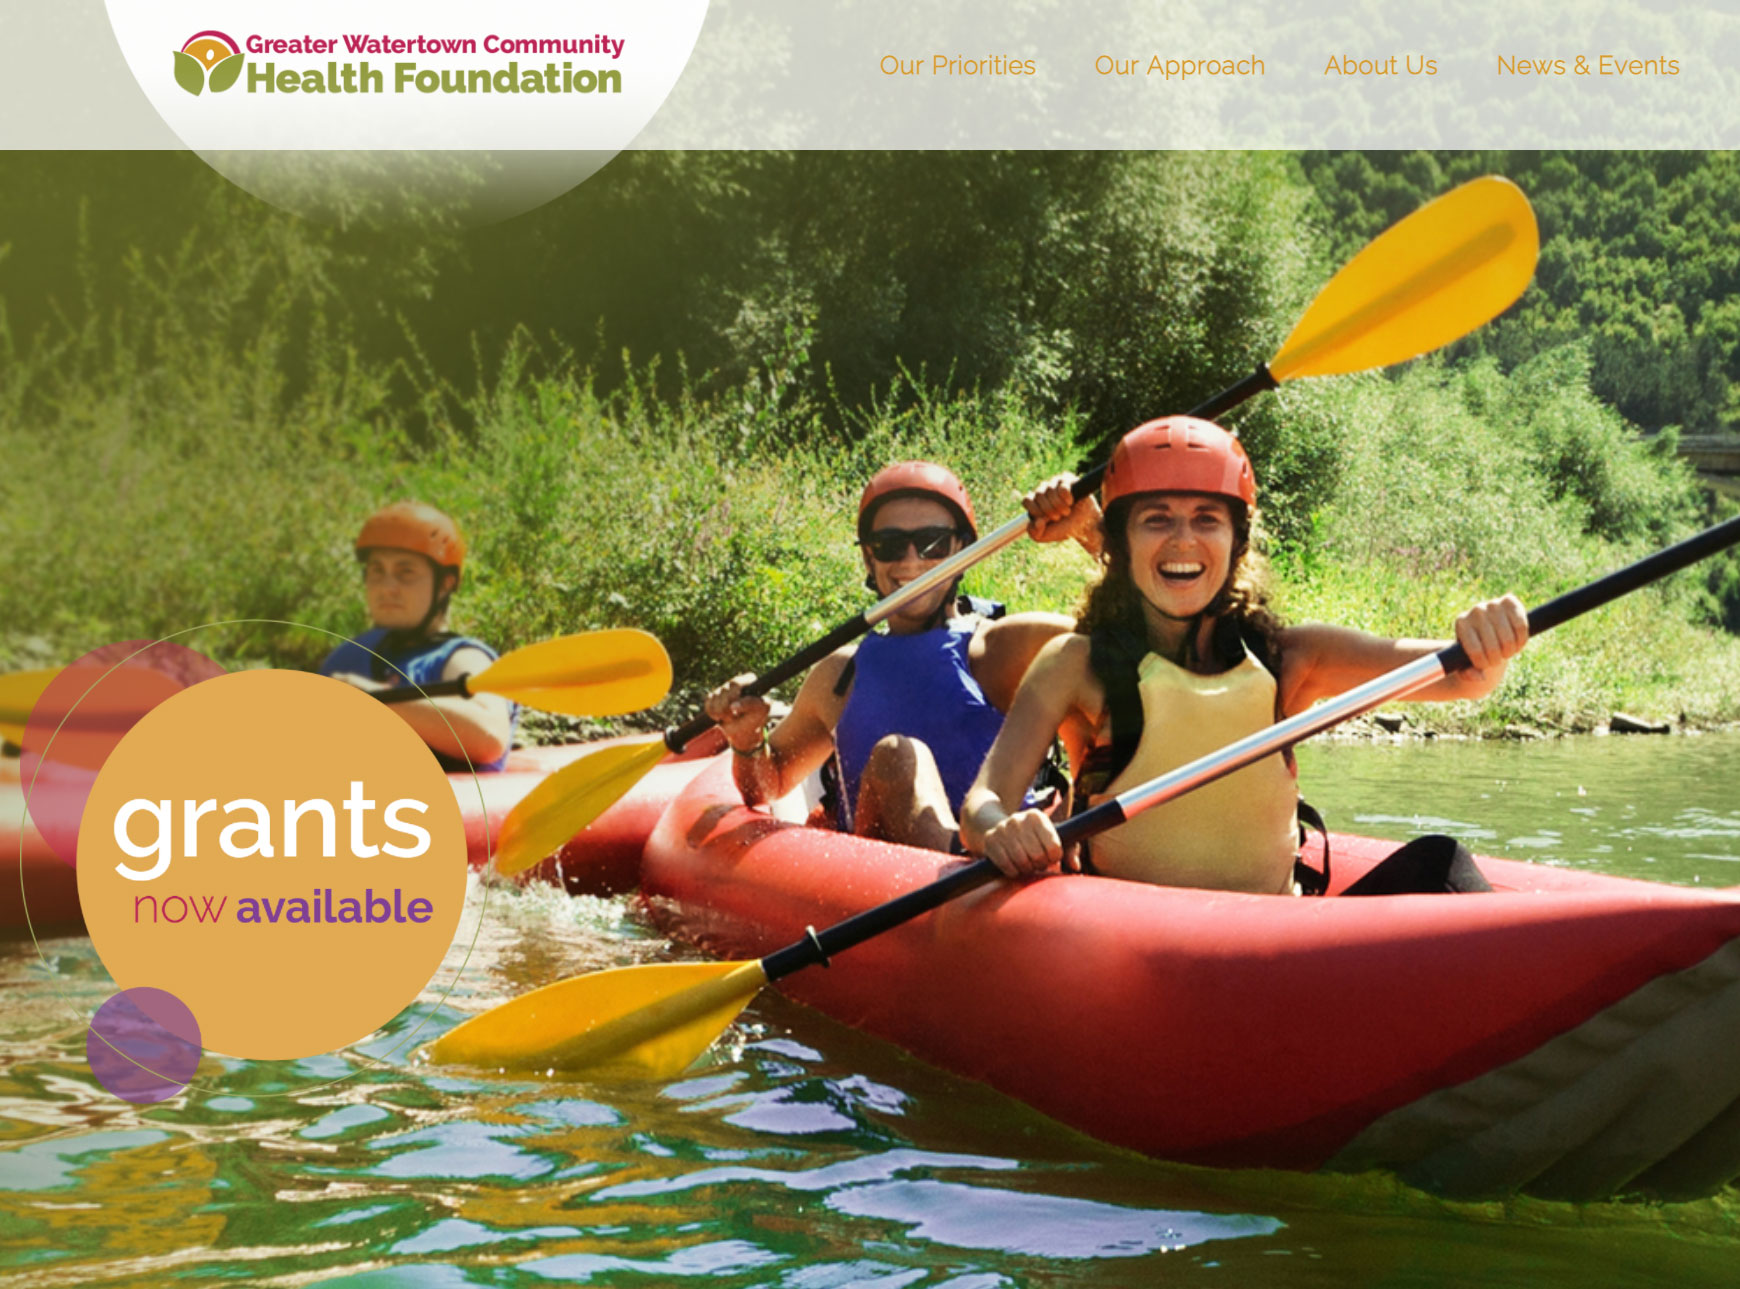 Greater Watertown Community Health Foundation